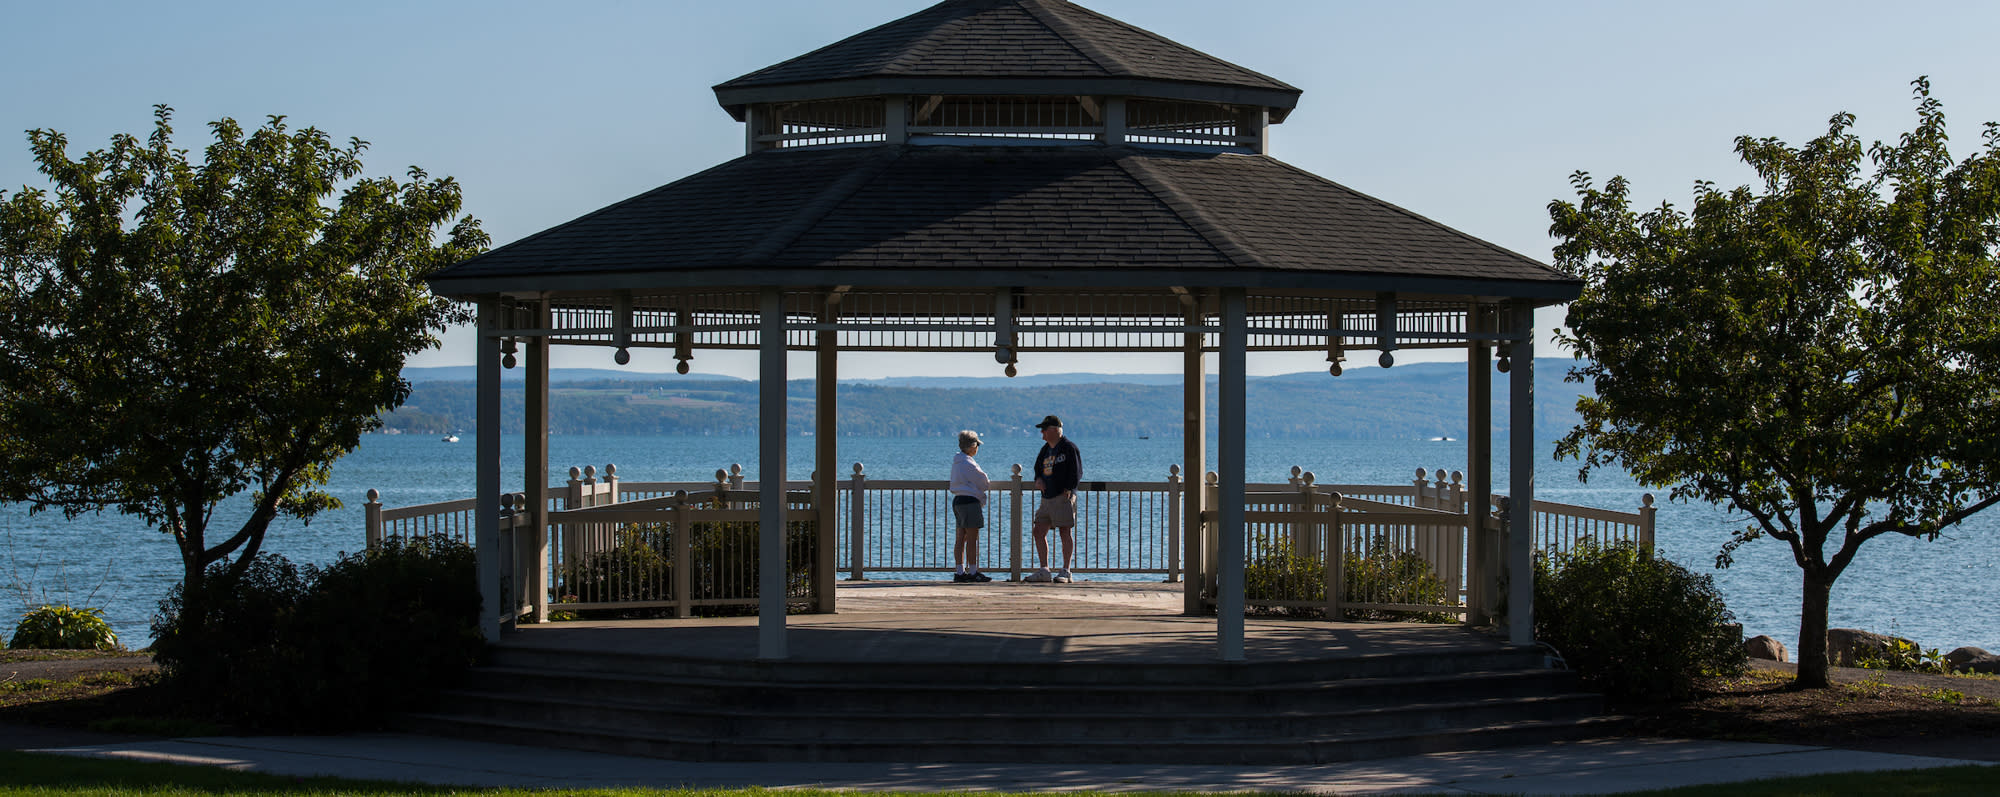 Two people standing in a gazebo overlooking Canandaigua Lake